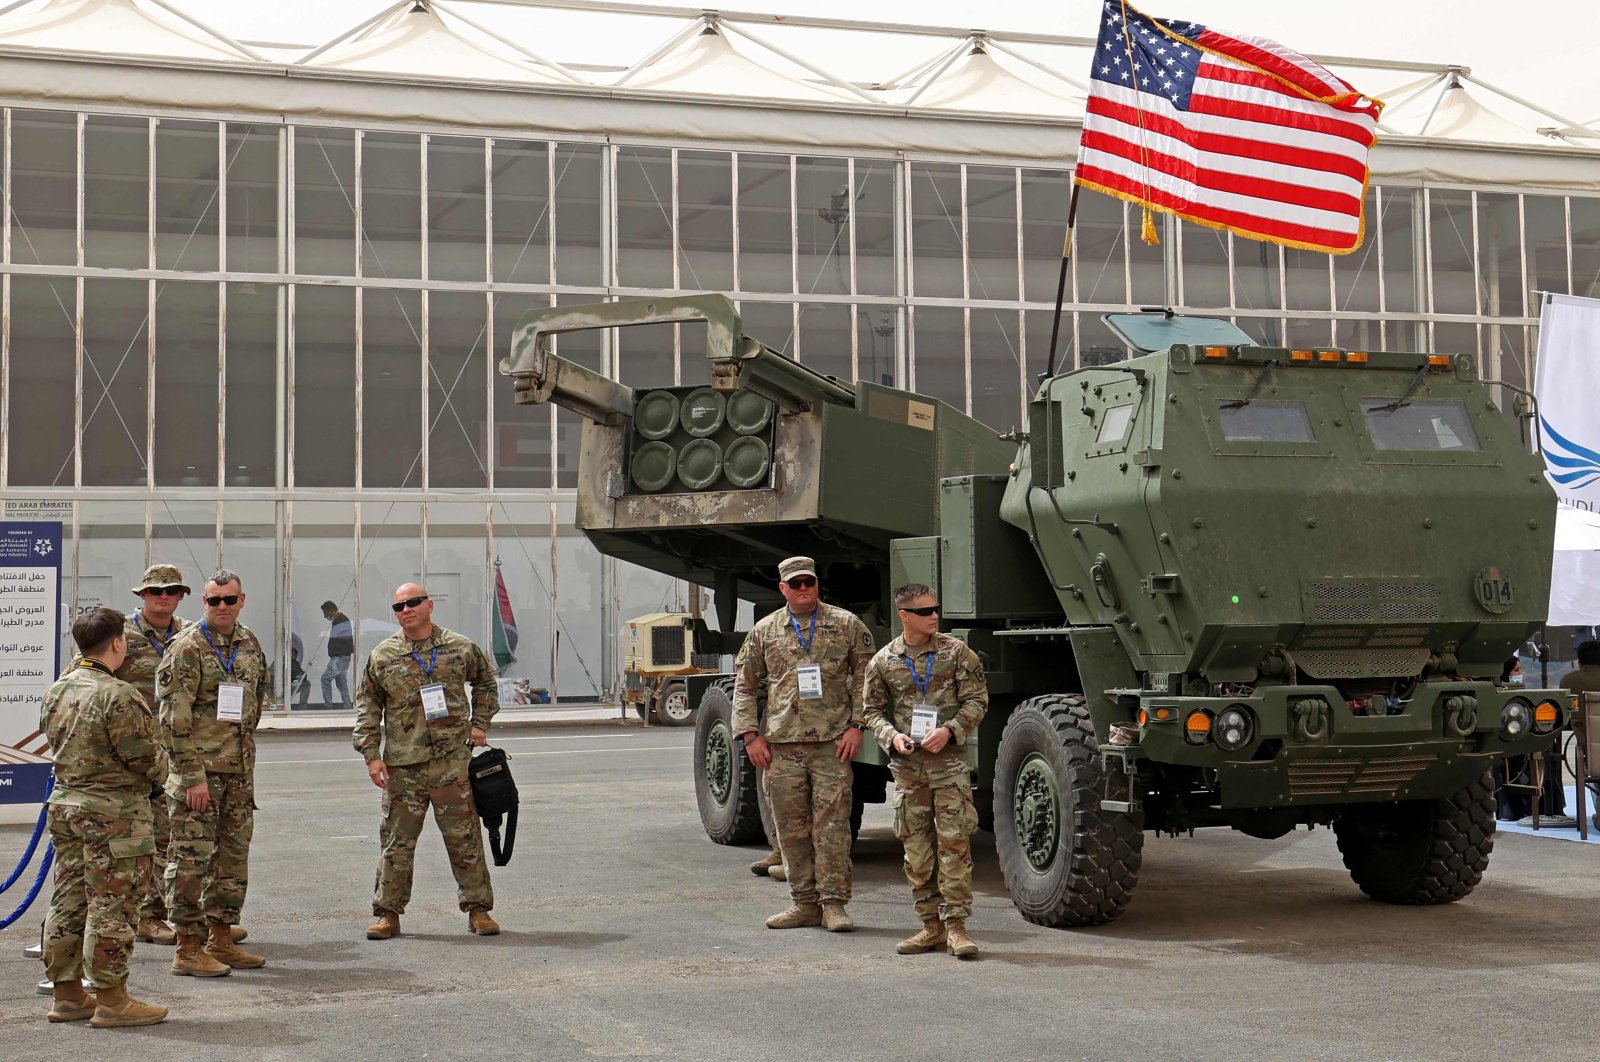 U.S. military personnel stand by a M142 High Mobility Artillery Rocket System (HIMARS) during the first World Defense Show, north of the capital Riyadh, Saudi Arabia, March 6, 2022. (AFP Photo)